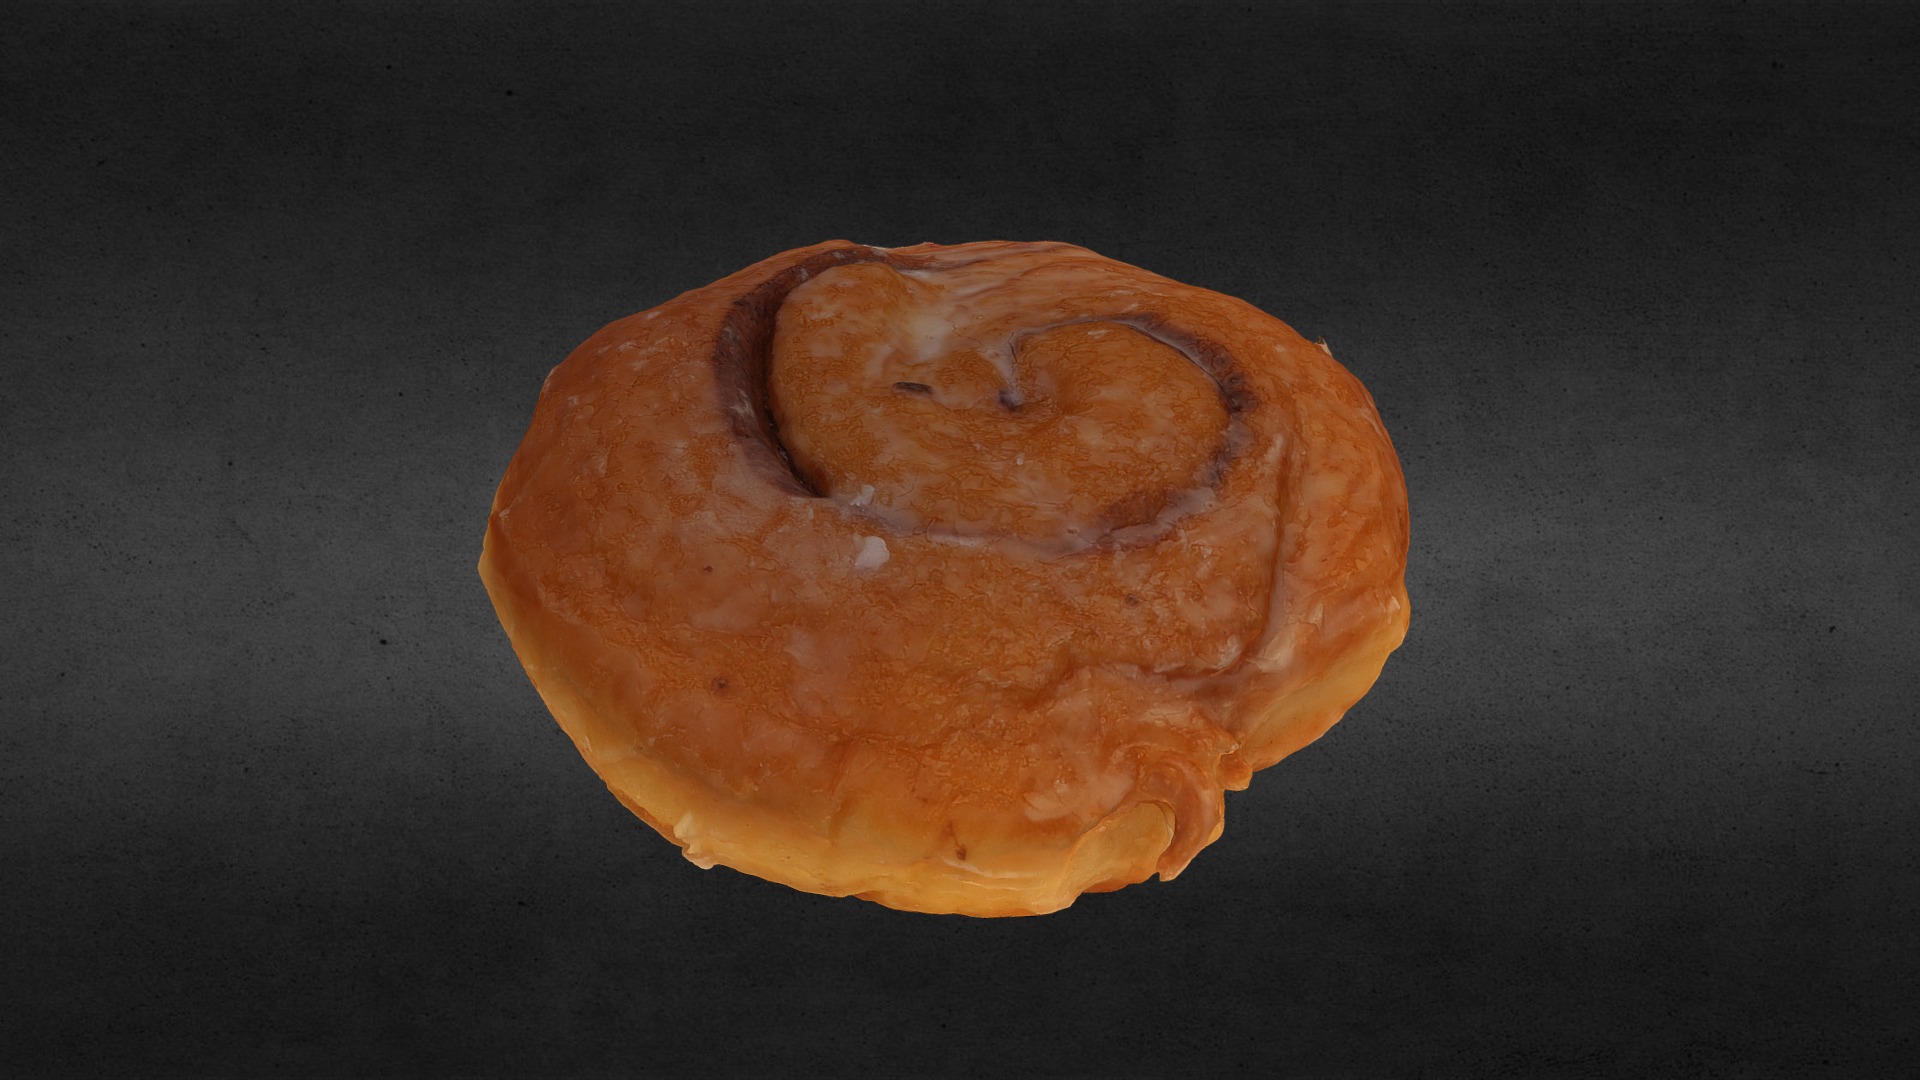 3D model Cinnamon Roll – Donut - This is a 3D model of the Cinnamon Roll - Donut. The 3D model is about a round orange pastry.